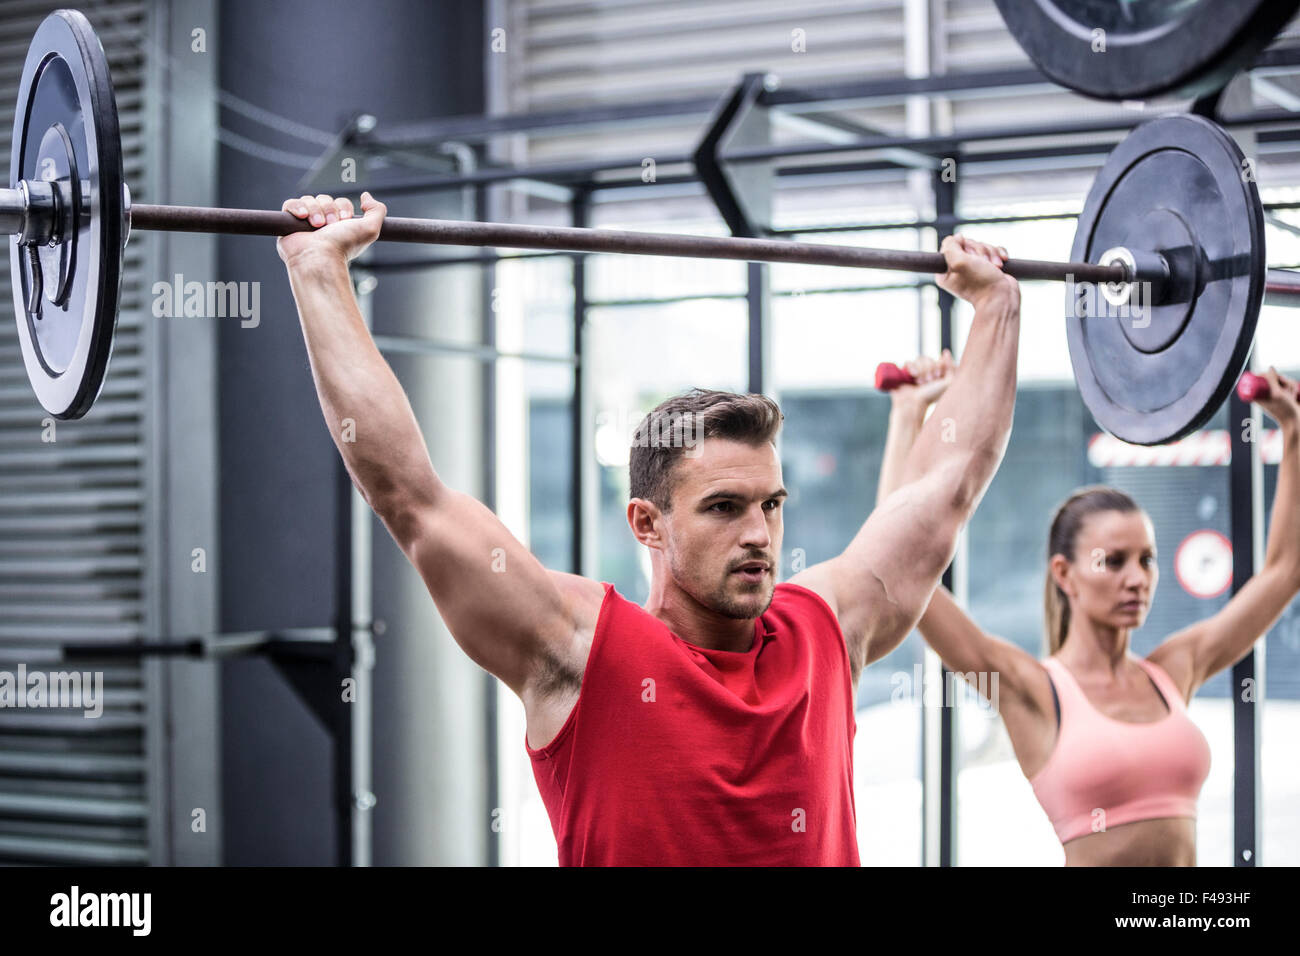 Two young Bodybuilders doing weightlifting Stock Photo